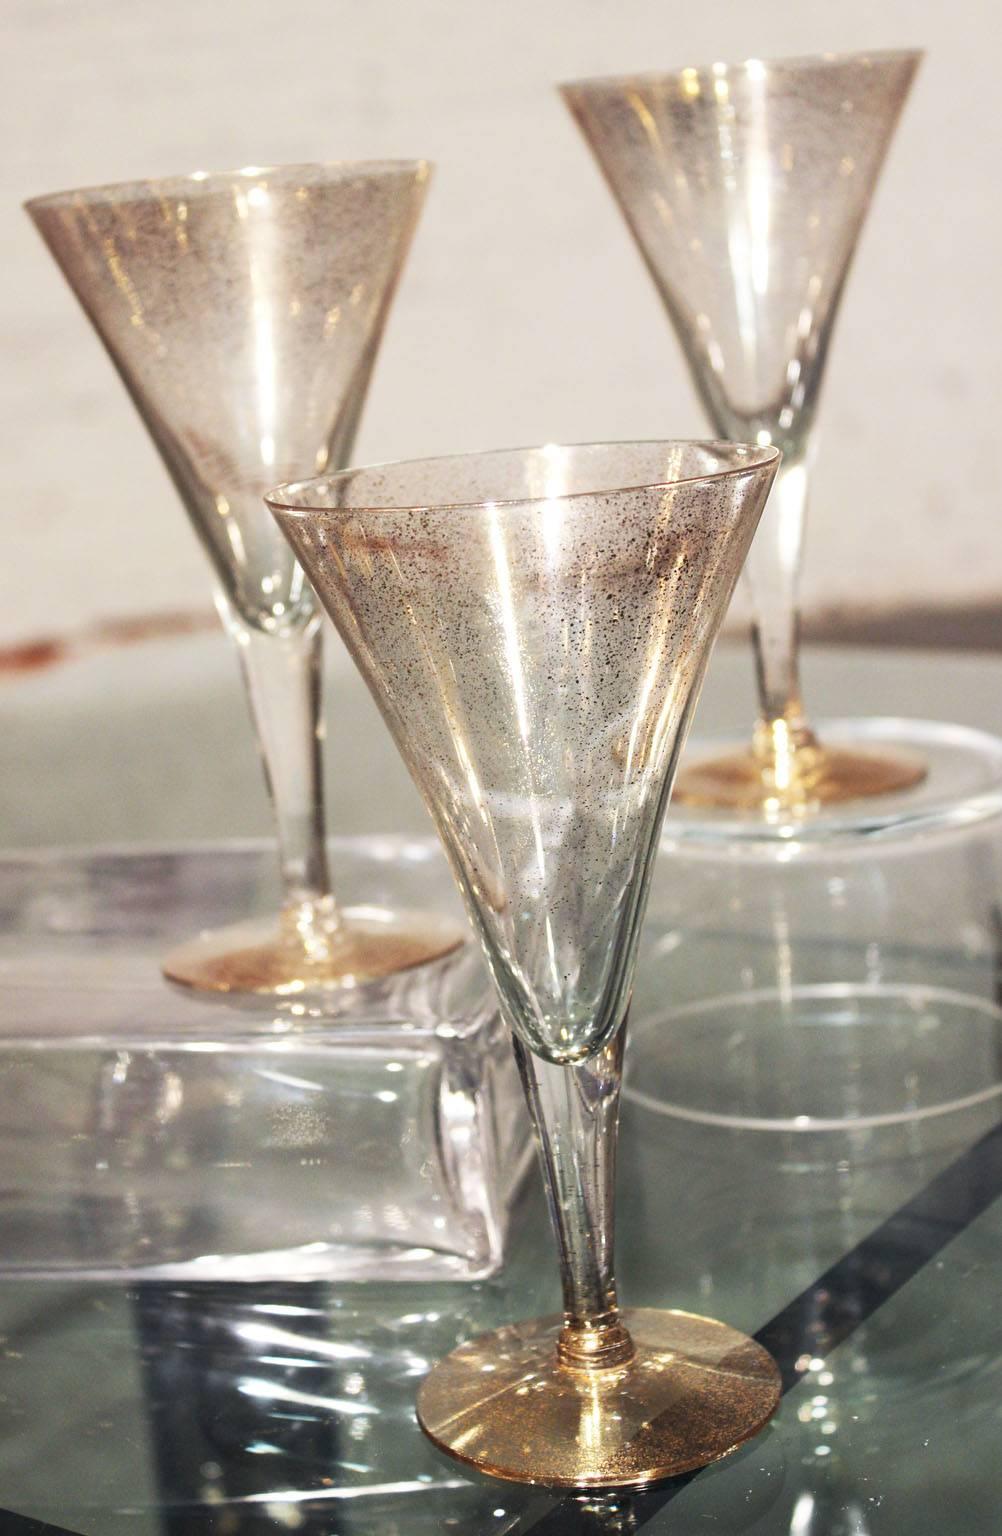 Wonderful and glamorous set of six Dorothy C. Thorpe gold fleck champagne or wine stemware glasses. These are in wonderful vintage condition.

Glamour is the word of the day for this set of six gold fleck champagne flutes or wine glasses by